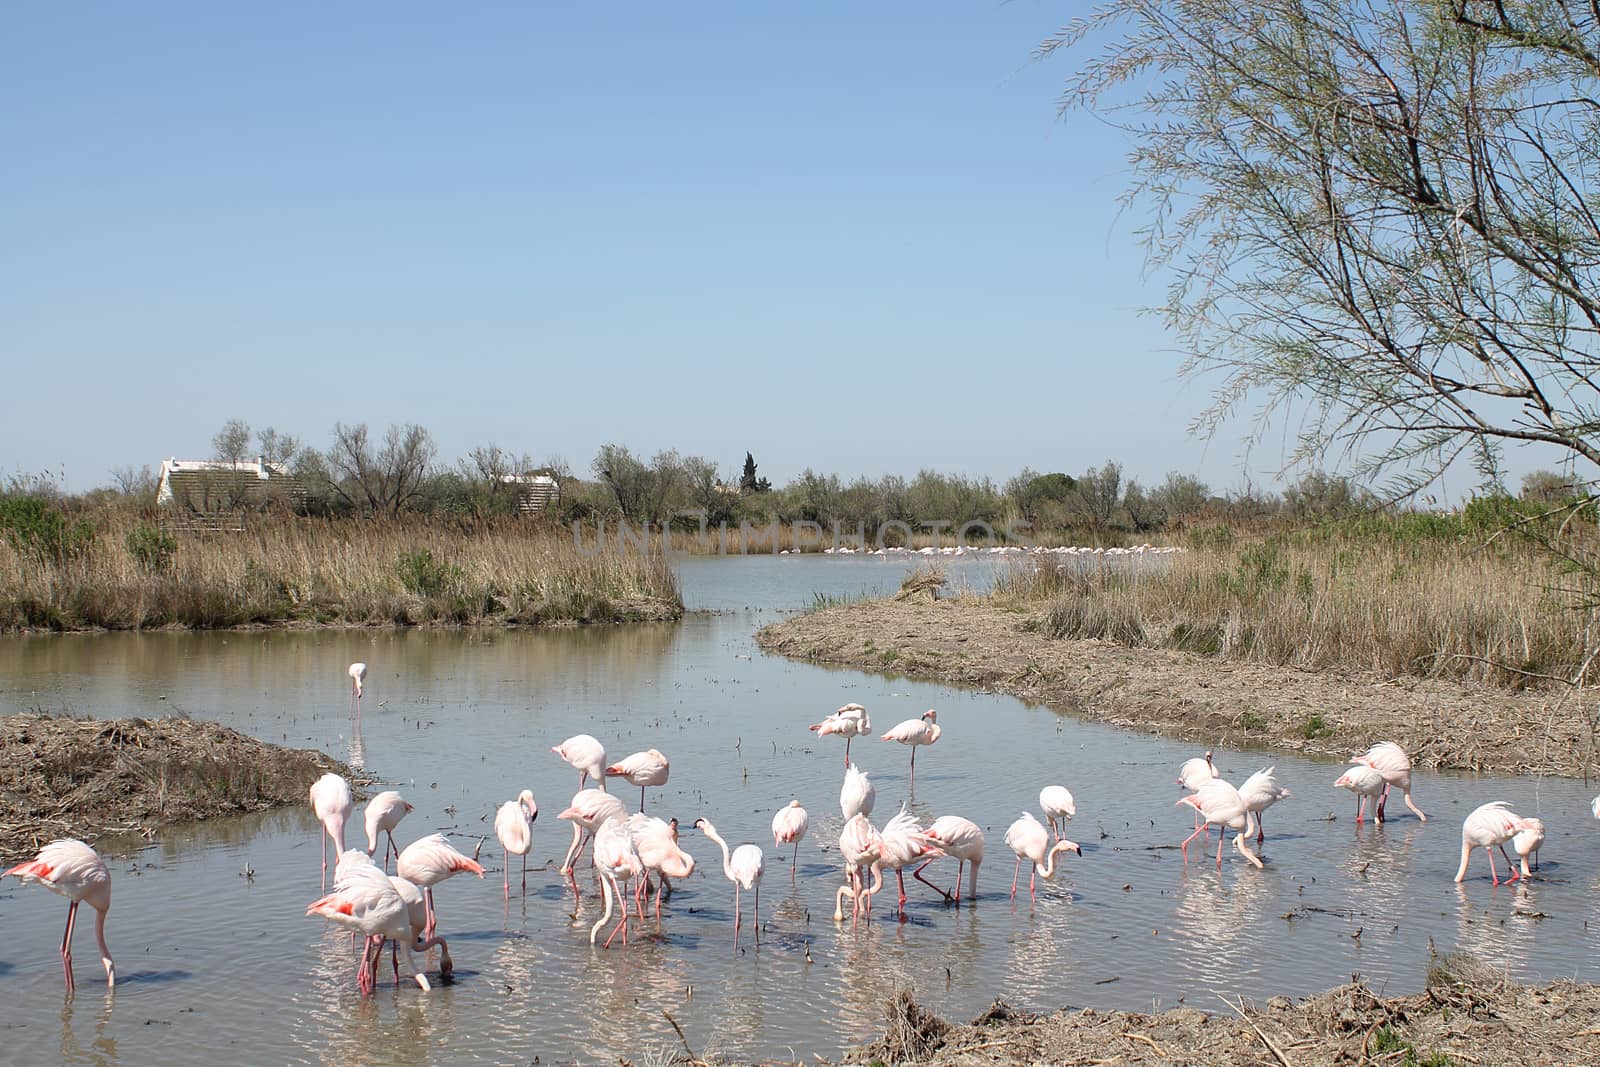 Pink flamingos in Camargue, France